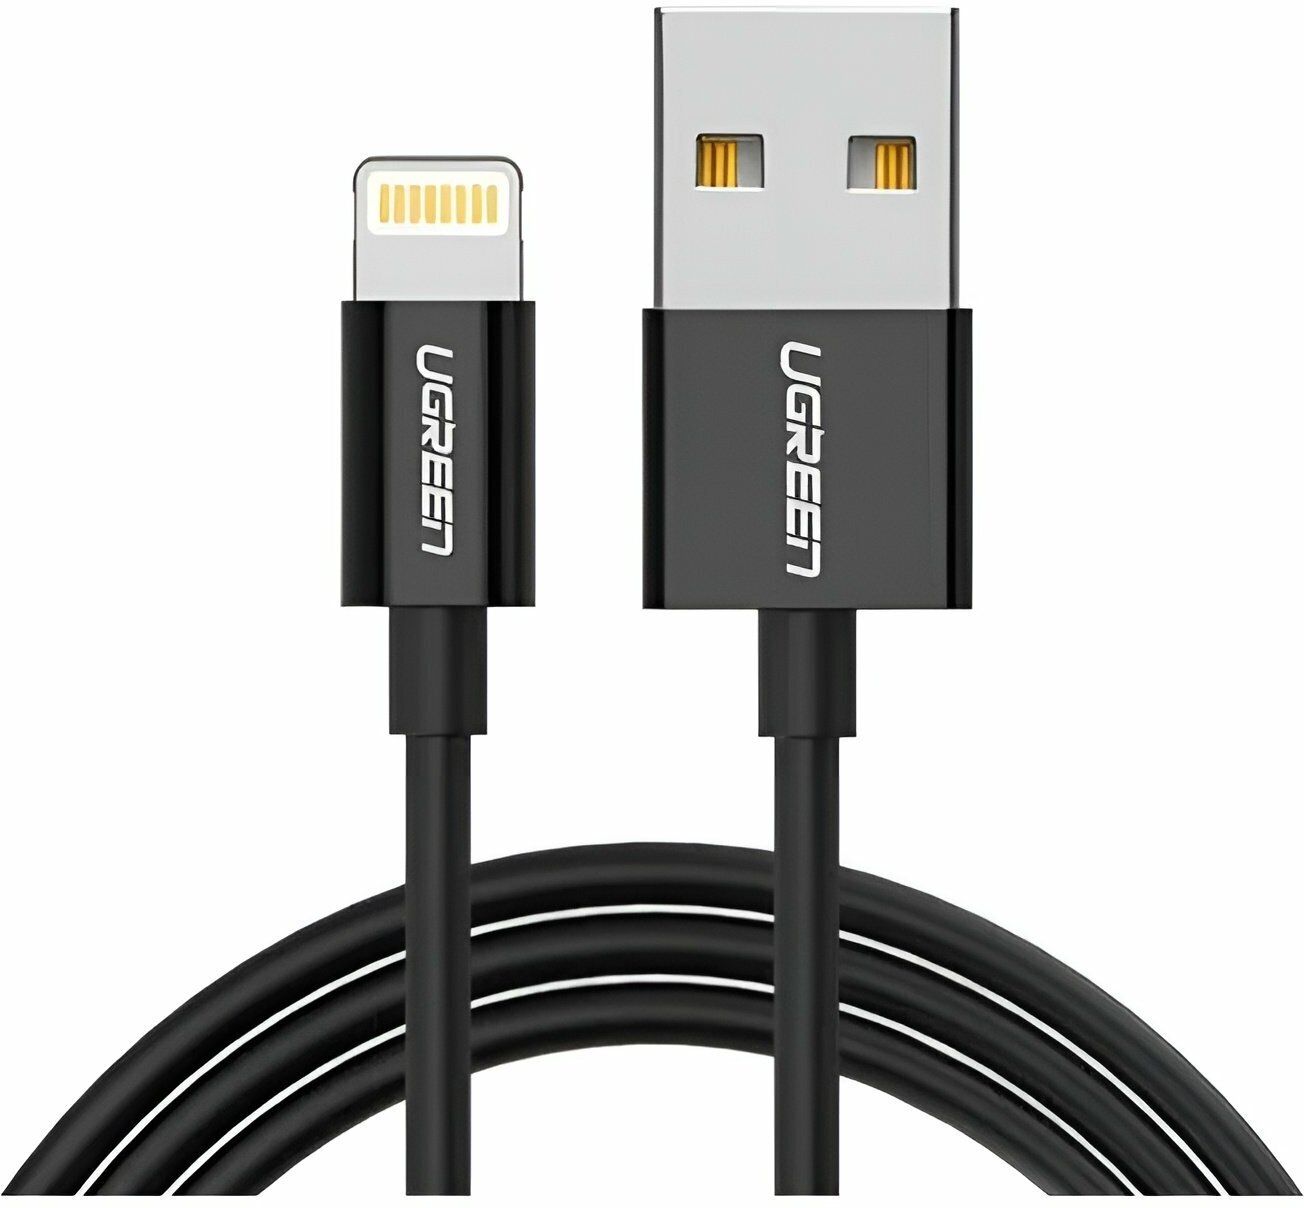 Кабель UGREEN US155 (80822) USB-A Male to Lightning Male Cable Nickel Plating ABS Shell Black кабель ugreen us155 80315 usb a male to lightning male cable nickel plating abs shell white